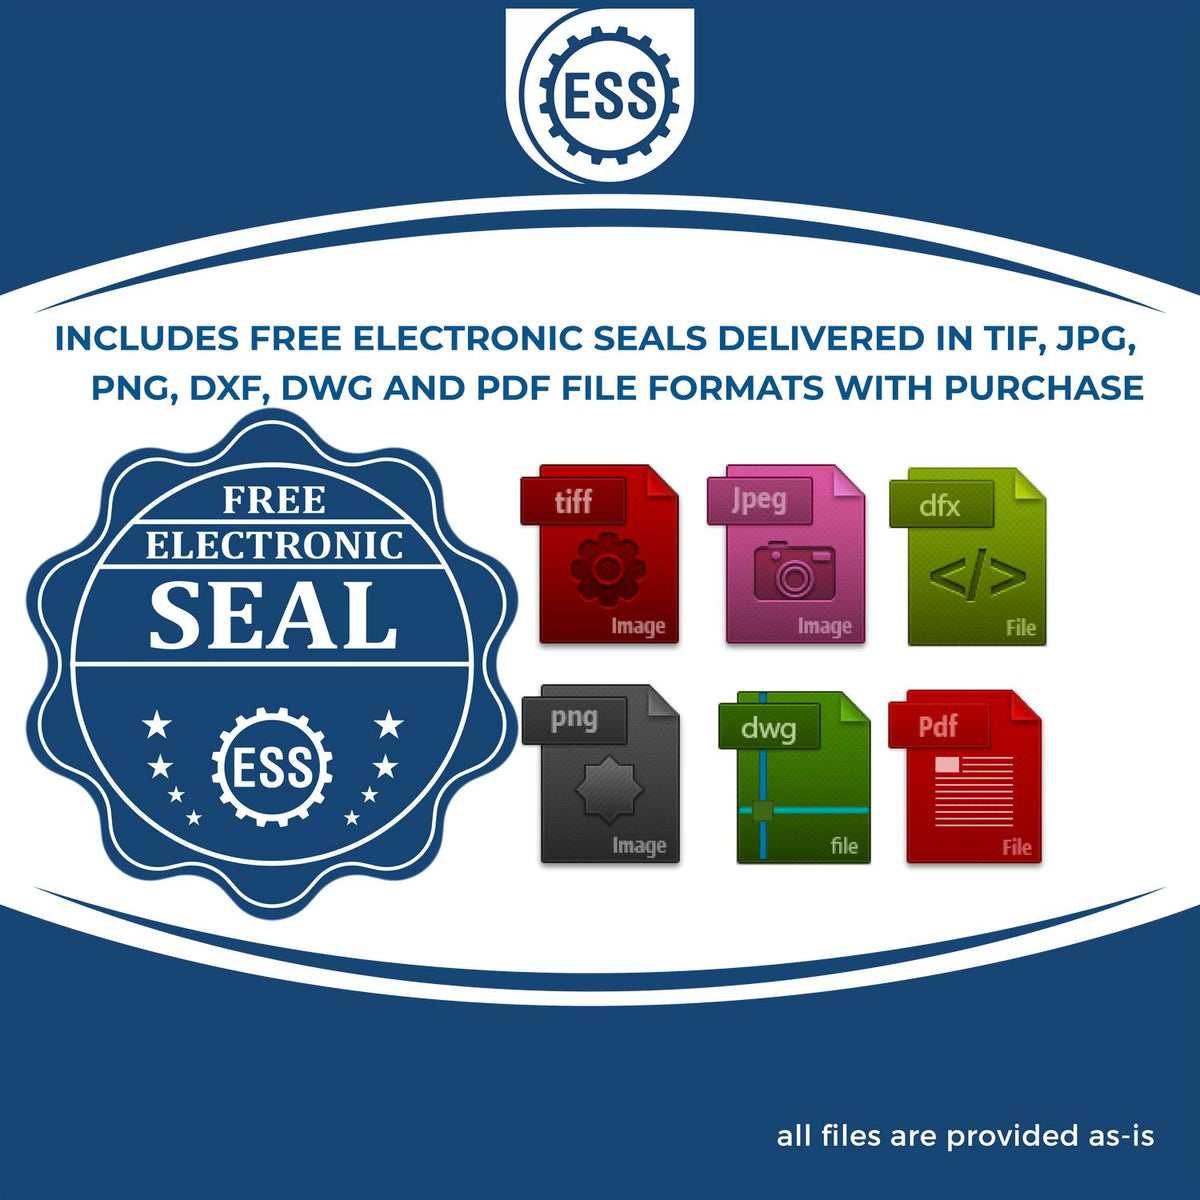 An infographic for the free electronic seal for the Wooden Handle Oklahoma State Seal Notary Public Stamp illustrating the different file type icons such as DXF, DWG, TIF, JPG and PNG.